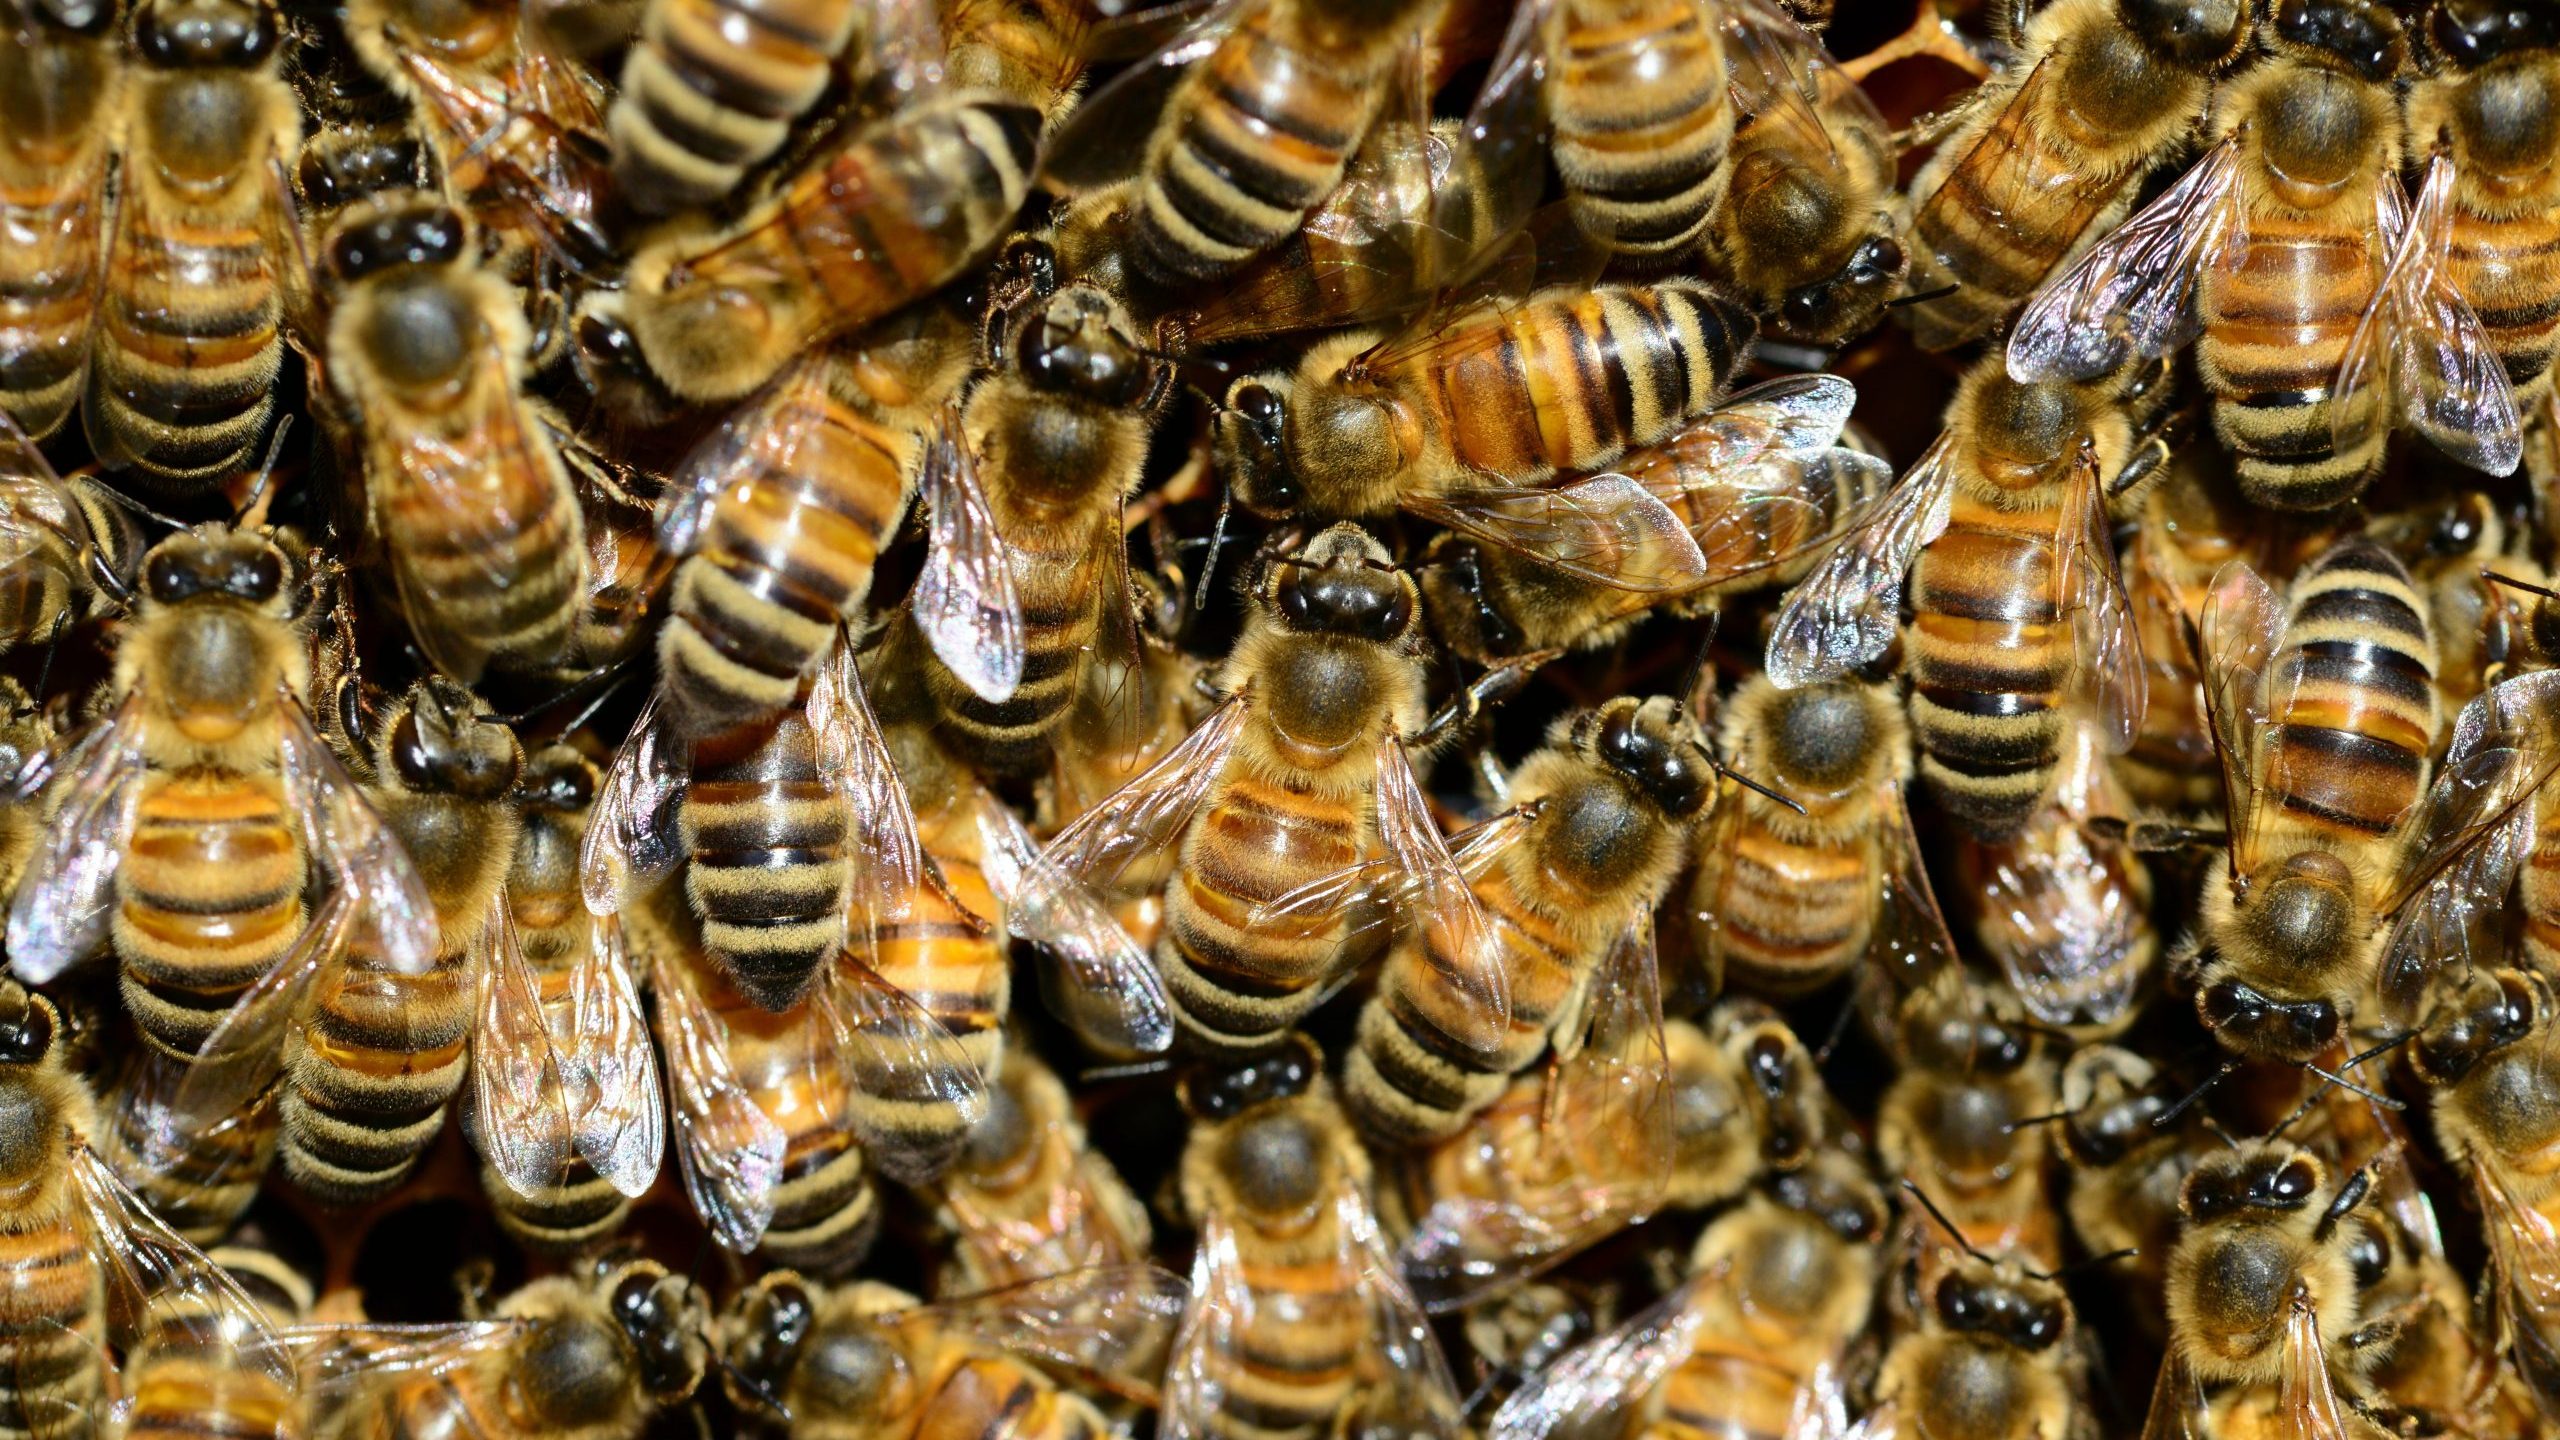 2 people taken to the hospital after being stung by bees in Scottsdale